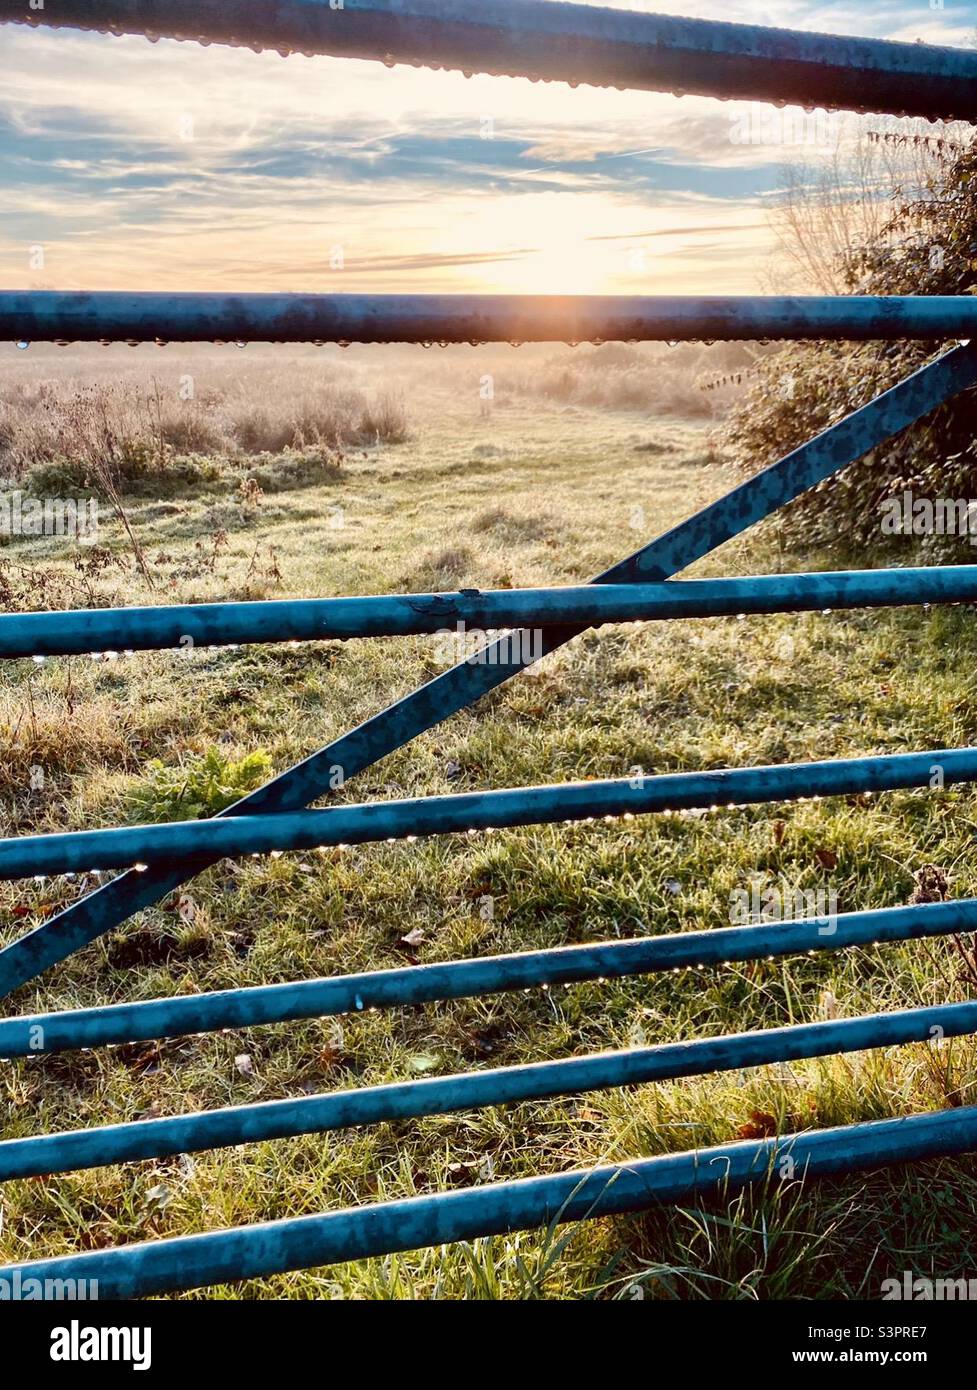 Morning dew on a metal field gate with the sun coming up to take the chill off the air - Suffolk Coast and Heaths Area of Natural Beauty, East Anglia, UK Stock Photo